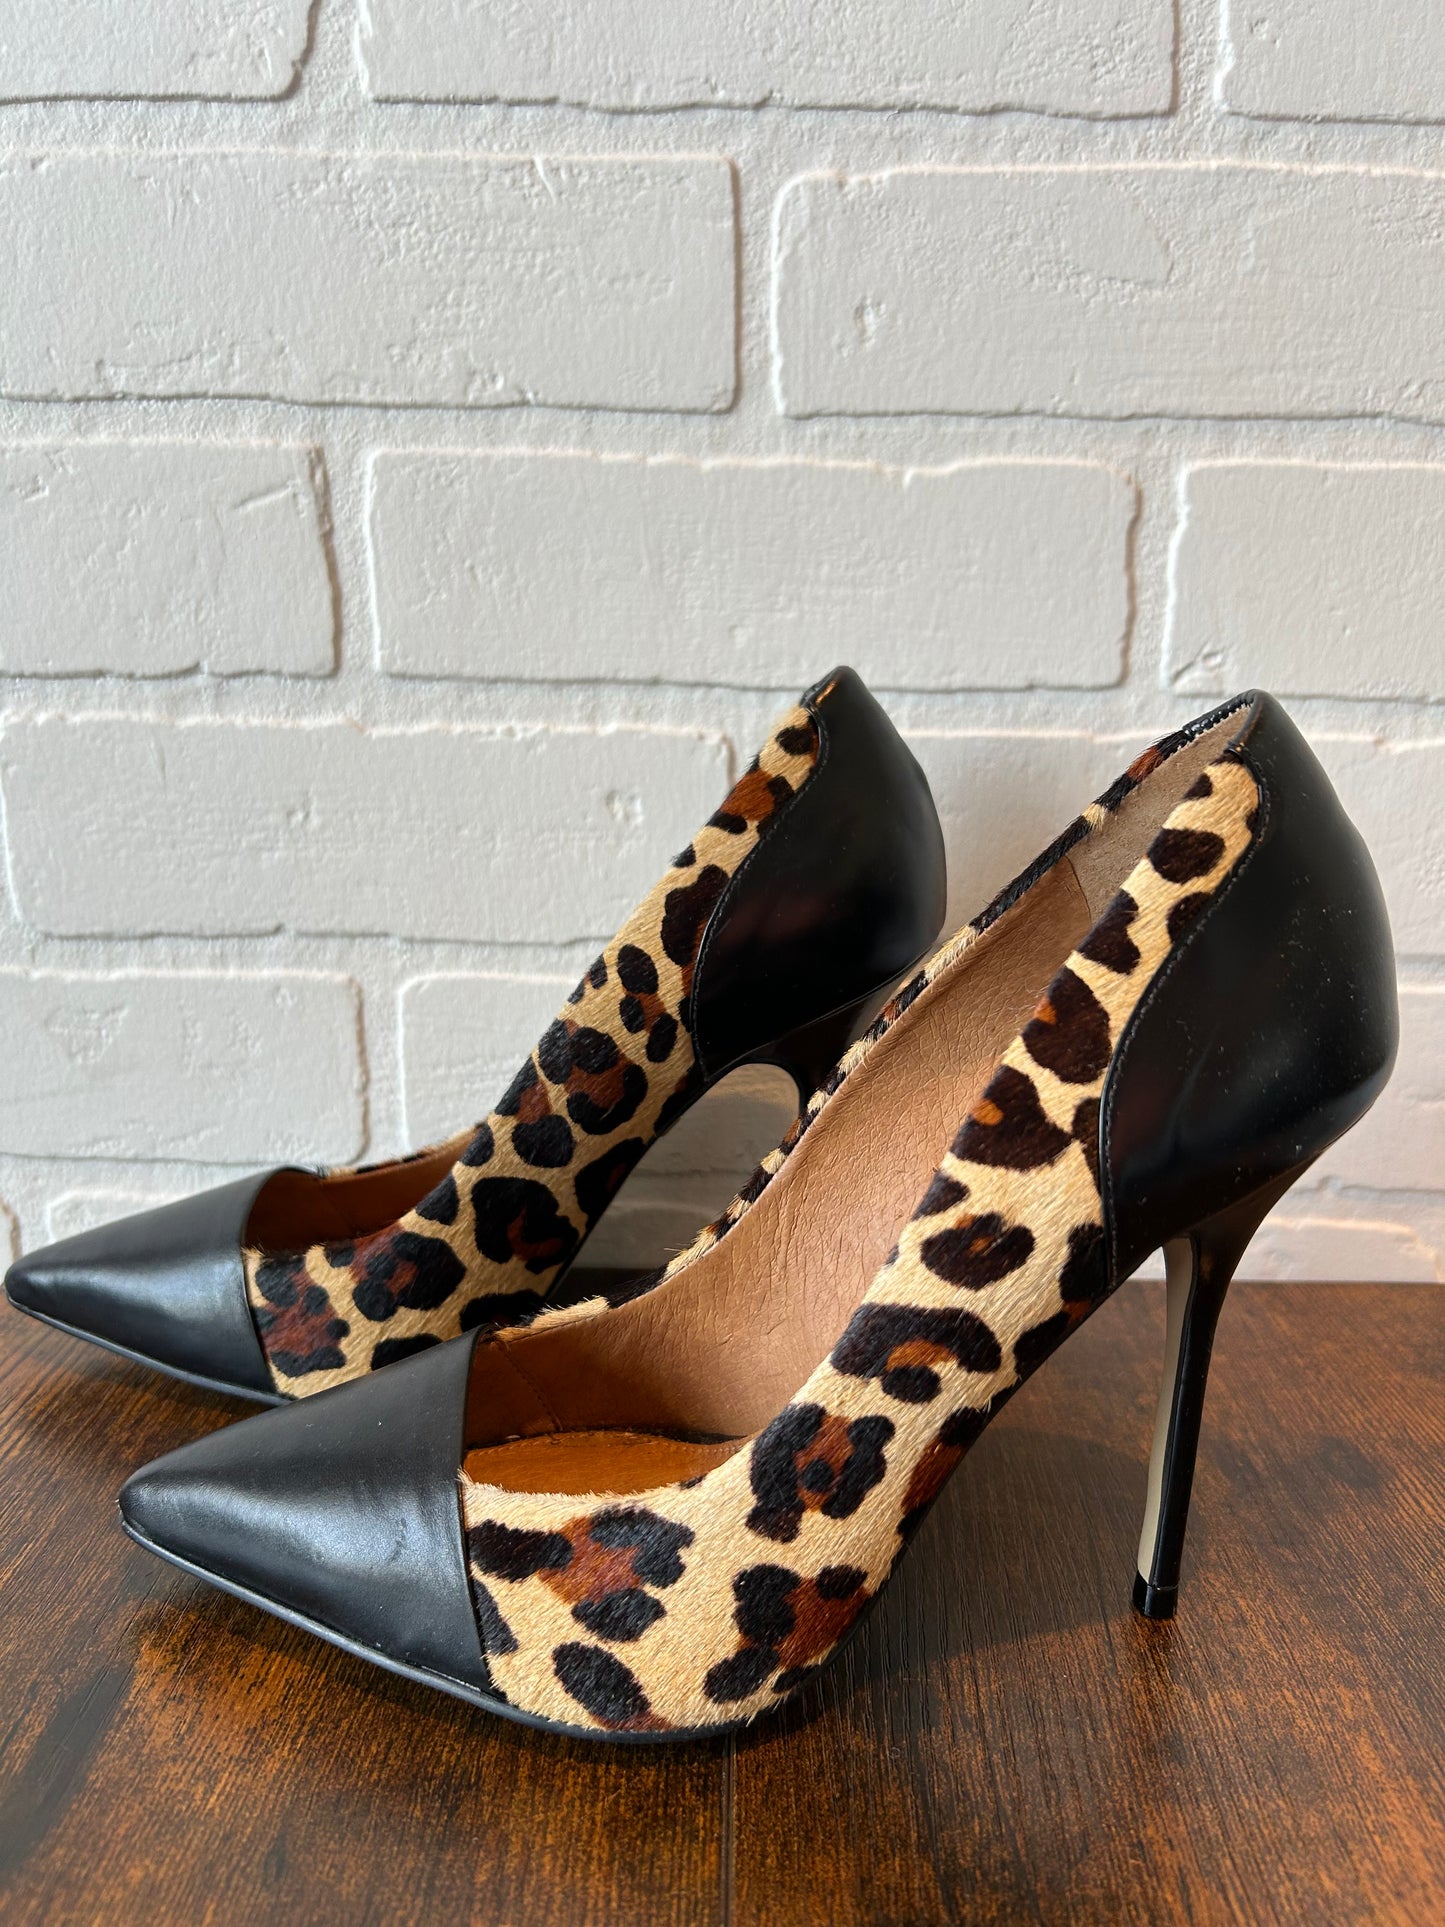 Shoes Heels Stiletto By Cmc  Size: 7.5